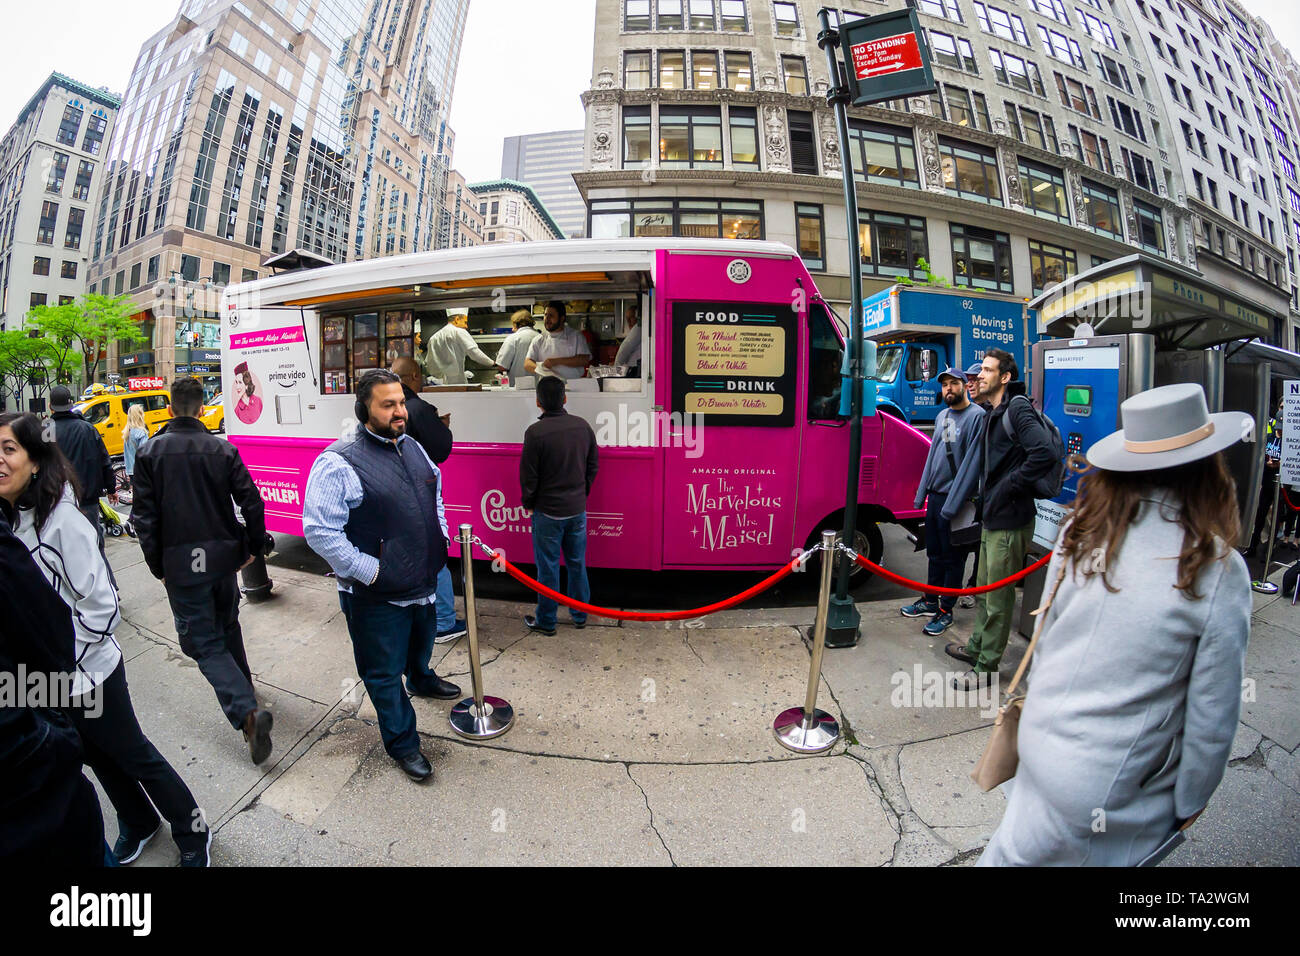 A “Carnegie Deli” food truck promoting the Amazon Prime Video series “The Marvelous Mrs. Maisel” in New York on Tuesday, May 14, 2019.  The truck, a promotion for the series during the Upfronts, gave out free “Midge” and “Suzie” deli sandwiches and black & white cookies. The Upfronts are a series of events held by the networks to promote their shows to advertisers. (© Richard B. Levine) Stock Photo